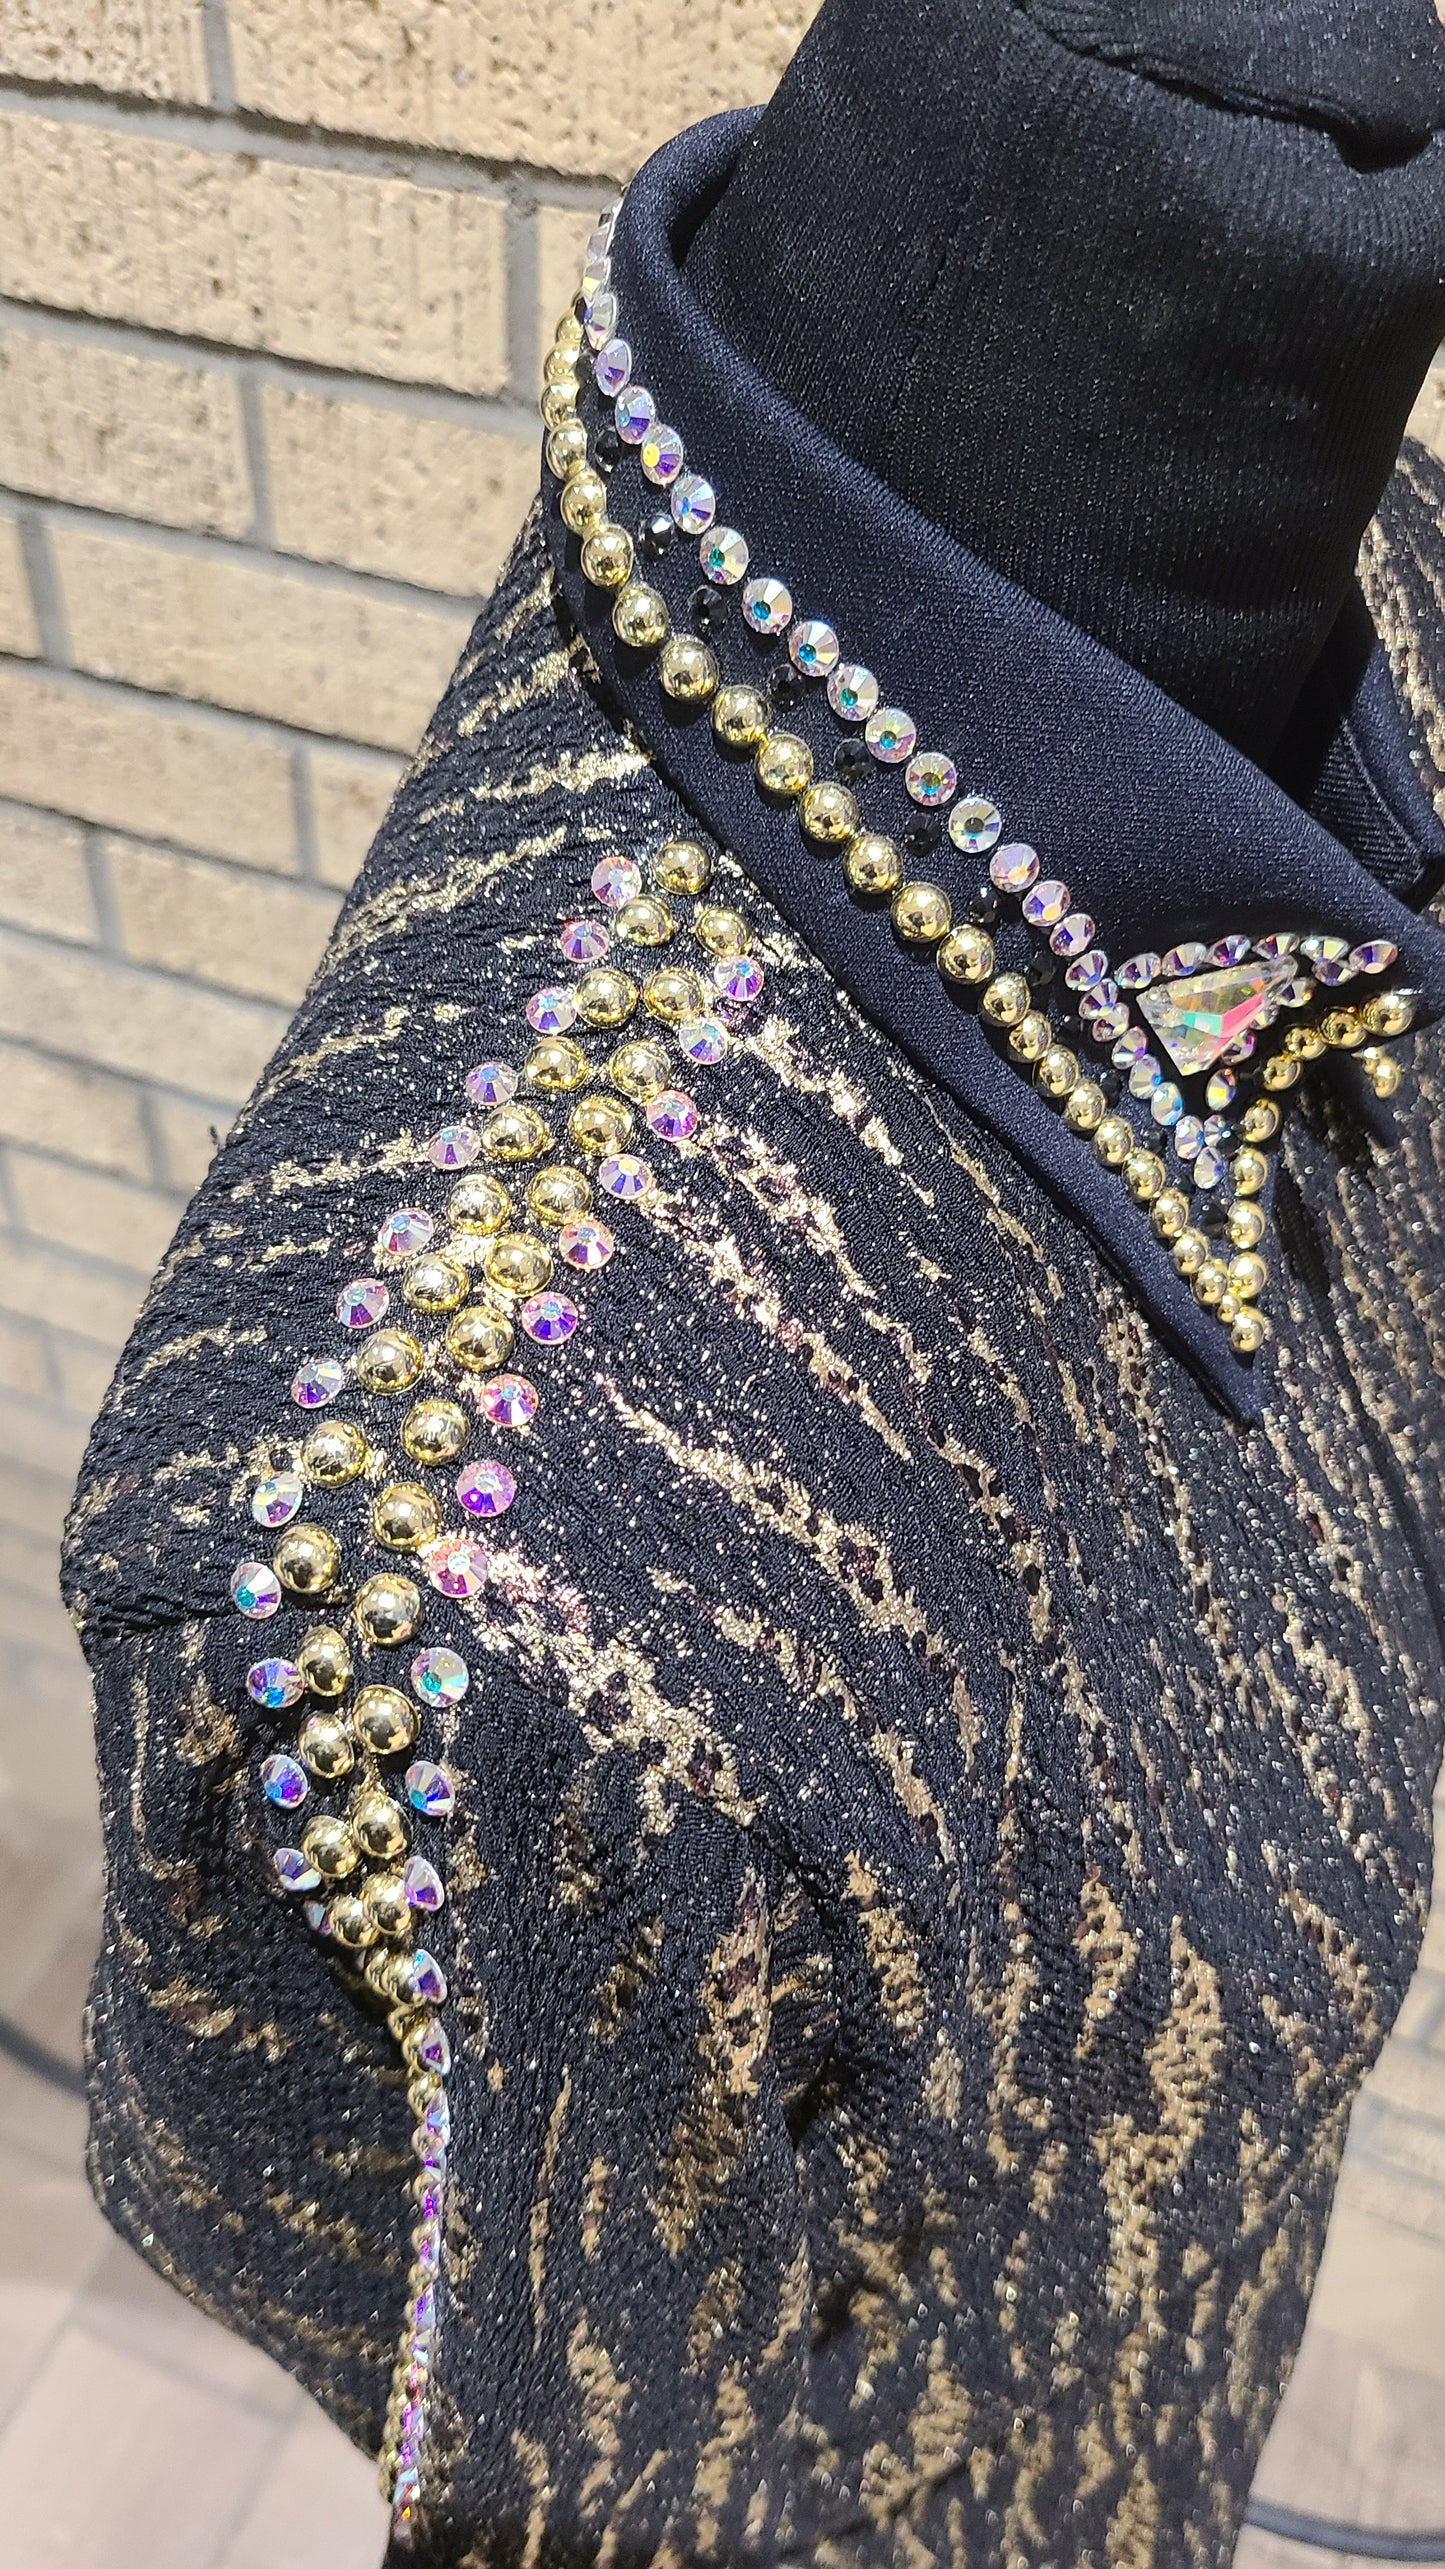 Size large black and gold shirt. AB crystals and gold pearls